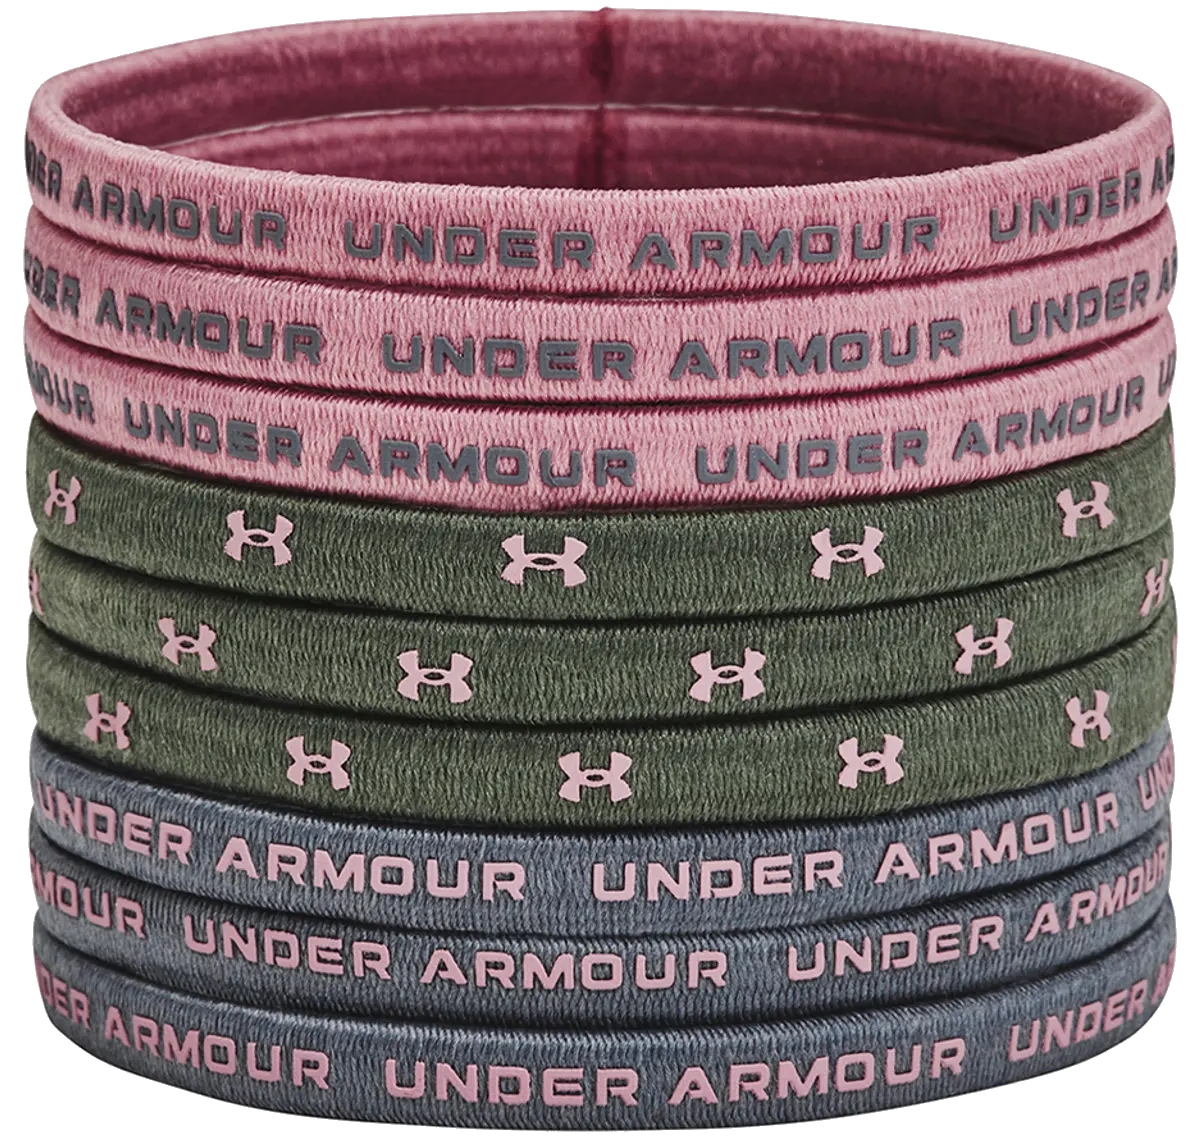 Rubber band Under Armour Hair Tie 9 pc